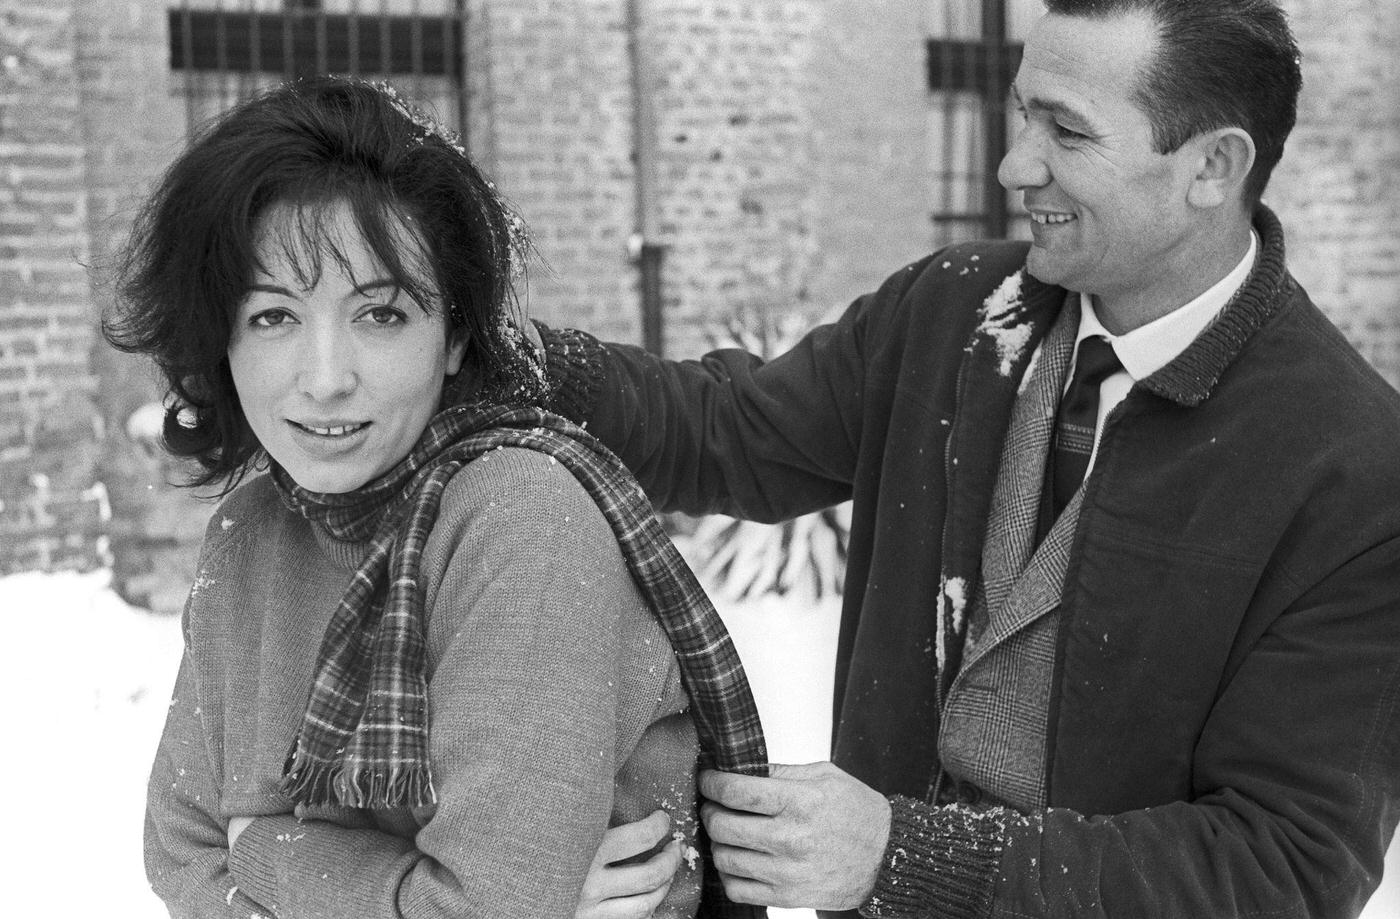 Italian actor Carlo Cabrini joking with Italian actress Anna Canzi. The two actors play the leading characters of the film The Fiances I fidanzati by Ermanno Olmi. Sant'Angelo Lodigiano, 1963